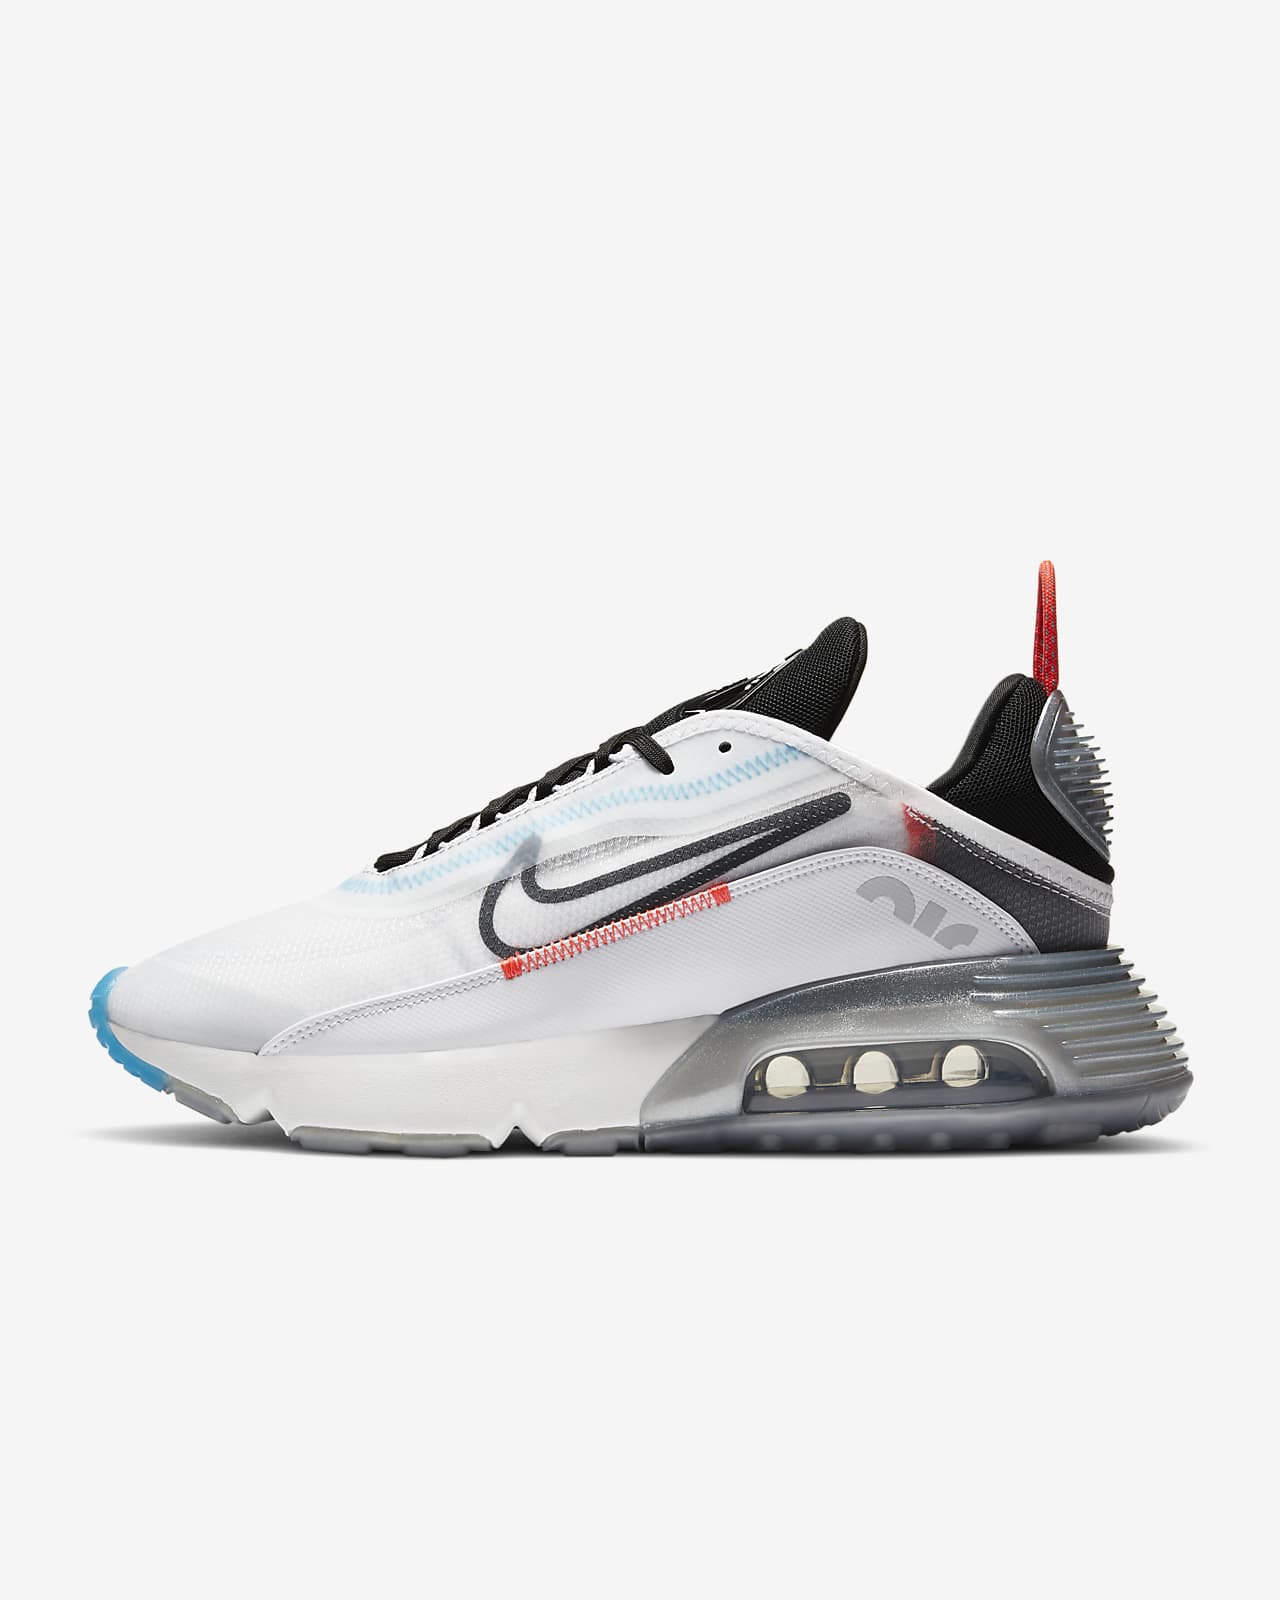 Nike Official Nike Air Max 2090 Men S Shoe Online Store Mail